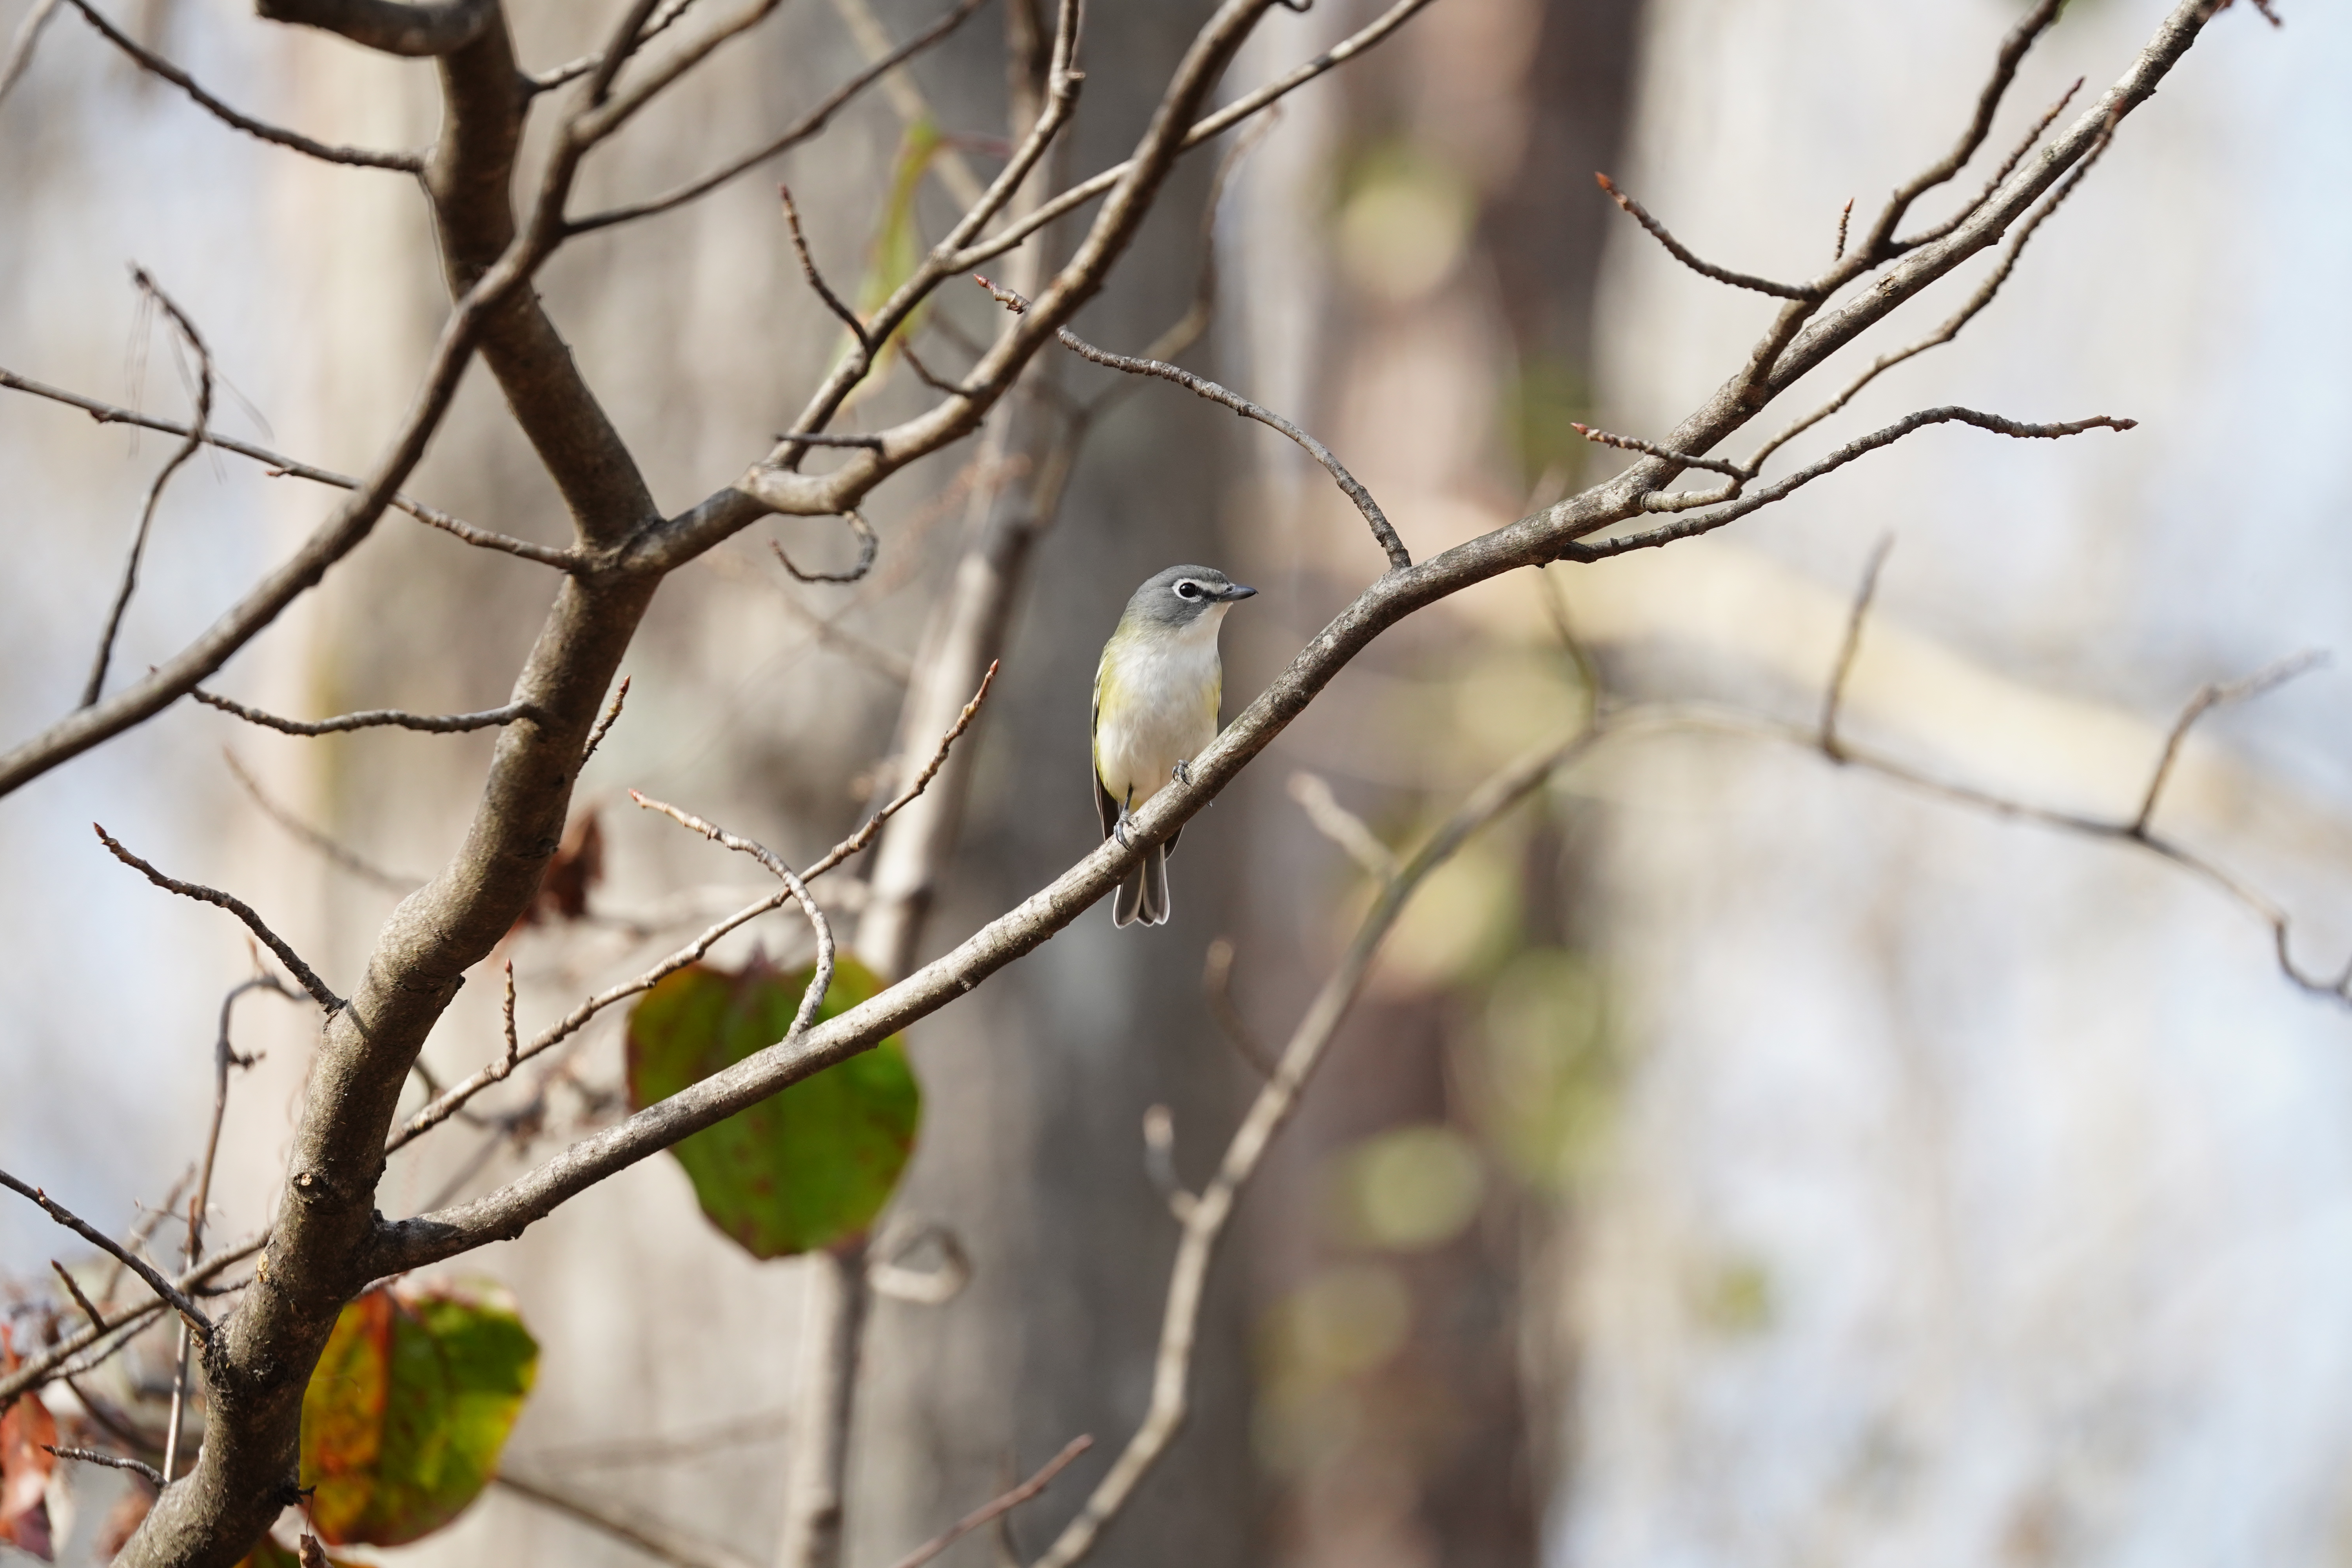 Blue-headed Vireo sits on a branch.